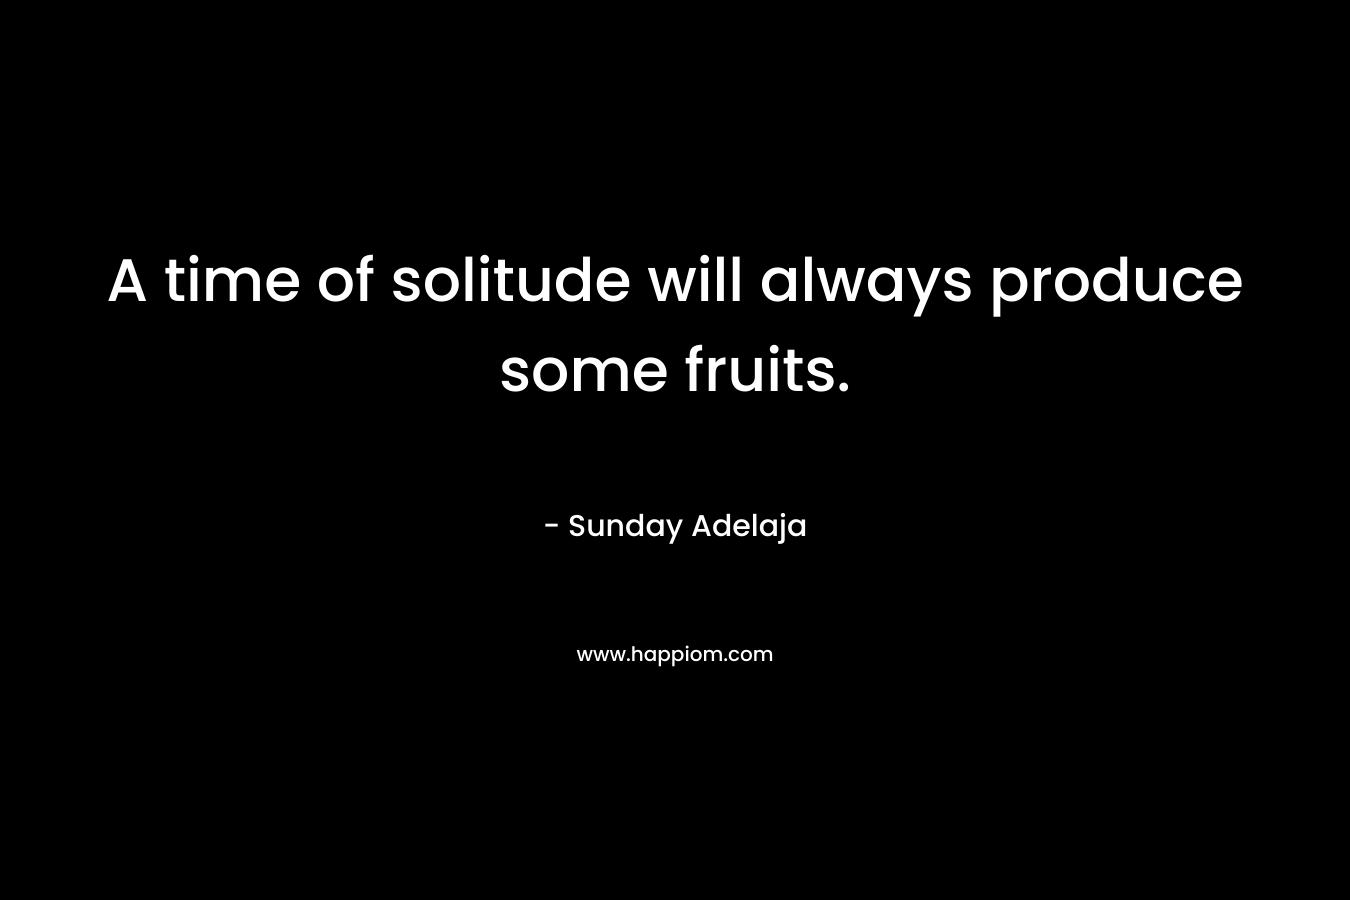 A time of solitude will always produce some fruits.